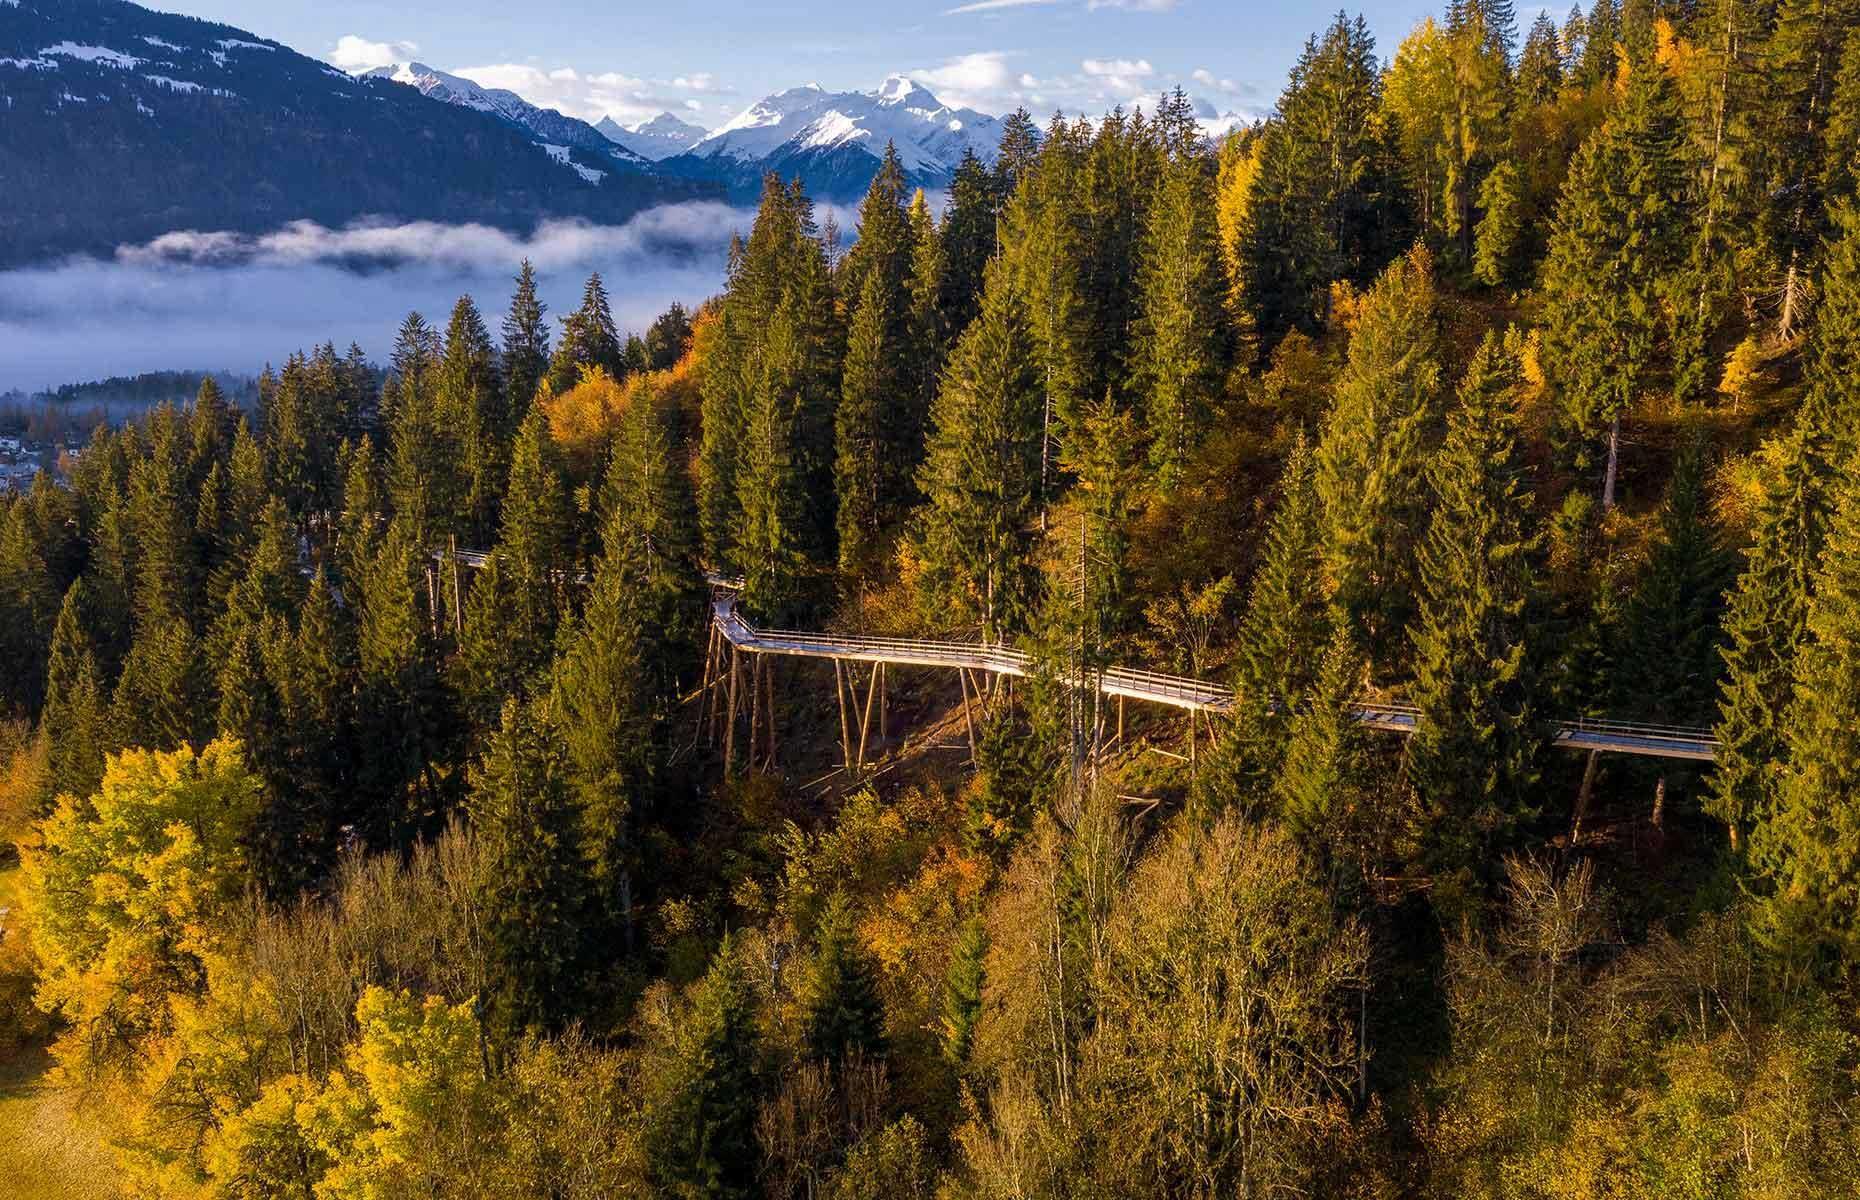 <p>This July, the Swiss ski resort town of Laax gained a stunning new attraction: the Path of the Dragon. This 0.97-mile (1.56km) walkway, perched as high as 92 feet (28m) above the ground at the highest point, is the world's longest treetop walkway. It's the perfect spot for admiring the region's breathtaking alpine views – but it's also a sight to behold from above, with the wooden path spiraling its way through a thick carpet of greenery. </p>  <p><strong><a href="https://www.loveexploring.com/galleries/81954/54-of-the-worlds-most-incredible-photos-from-above?page=1">Loved this? See our incredible planet photographed from above too</a></strong></p>